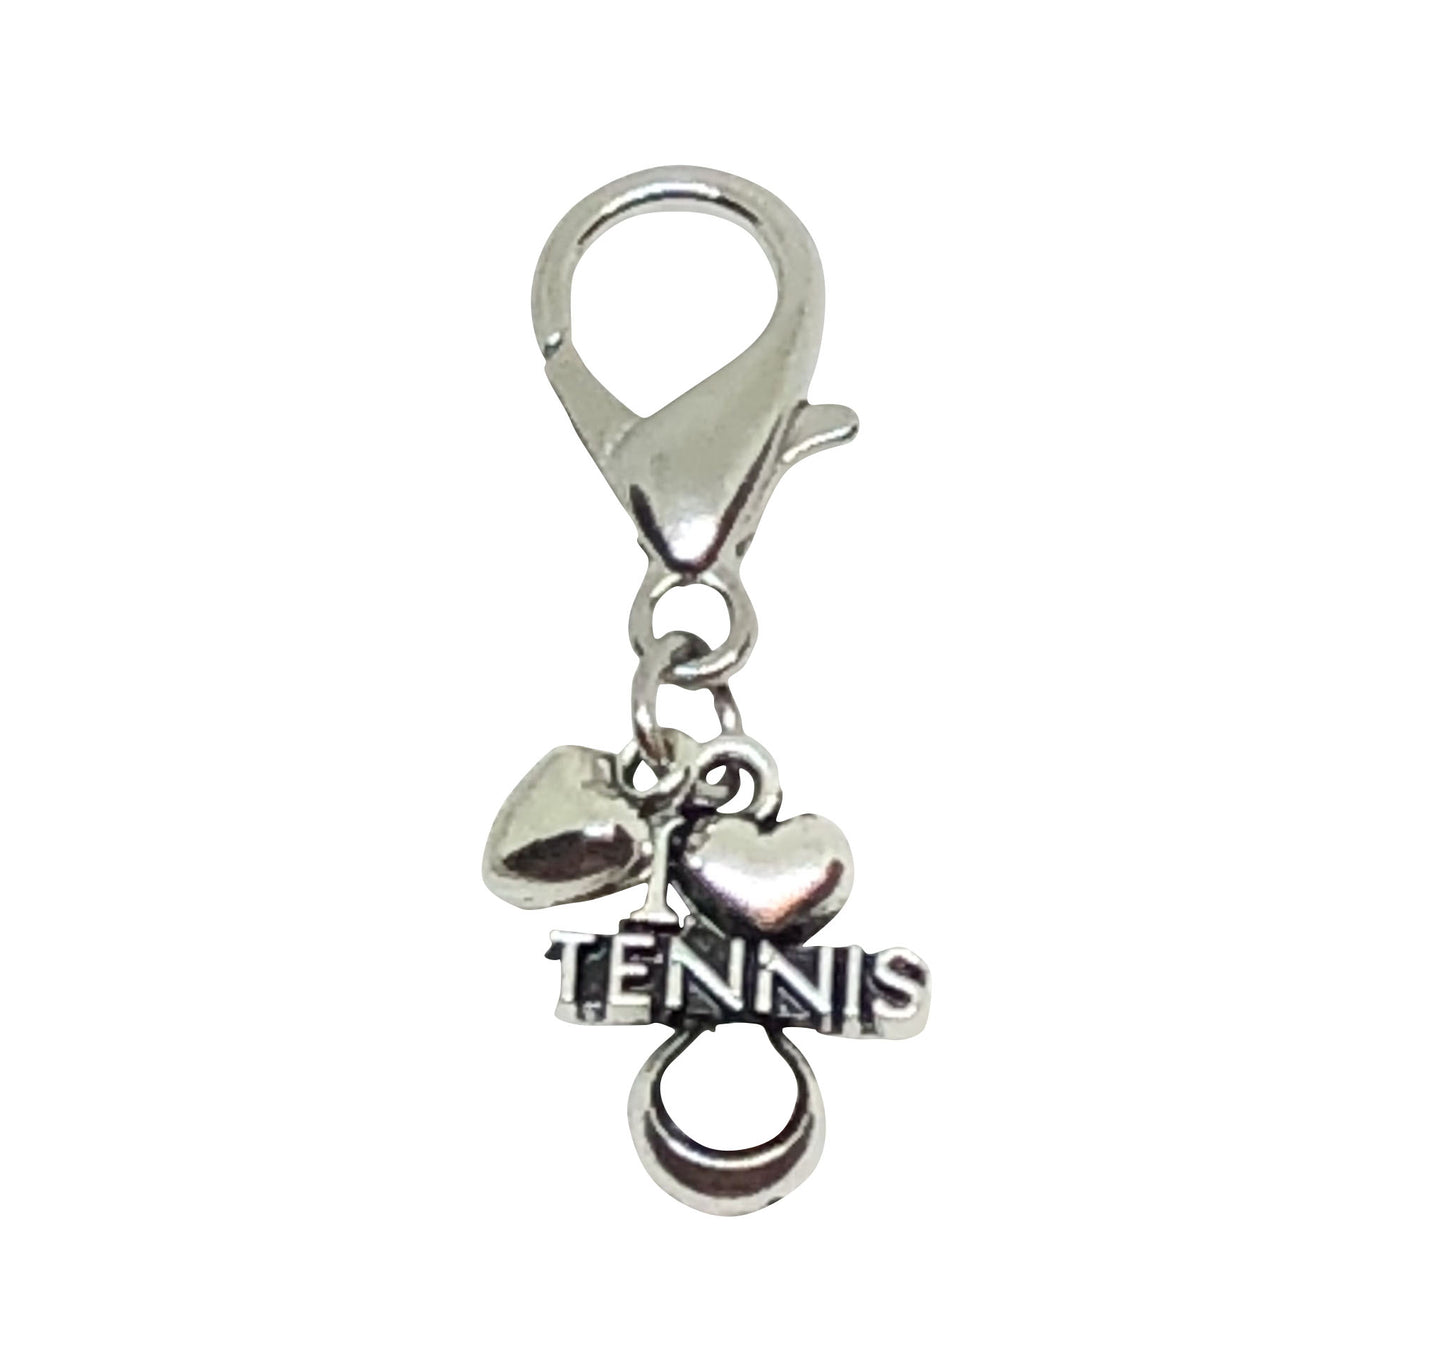 Load image into Gallery viewer, Tennis Zipper Pull - The Perfect Tennis Acccessory - Cheer and Dance On Demand
